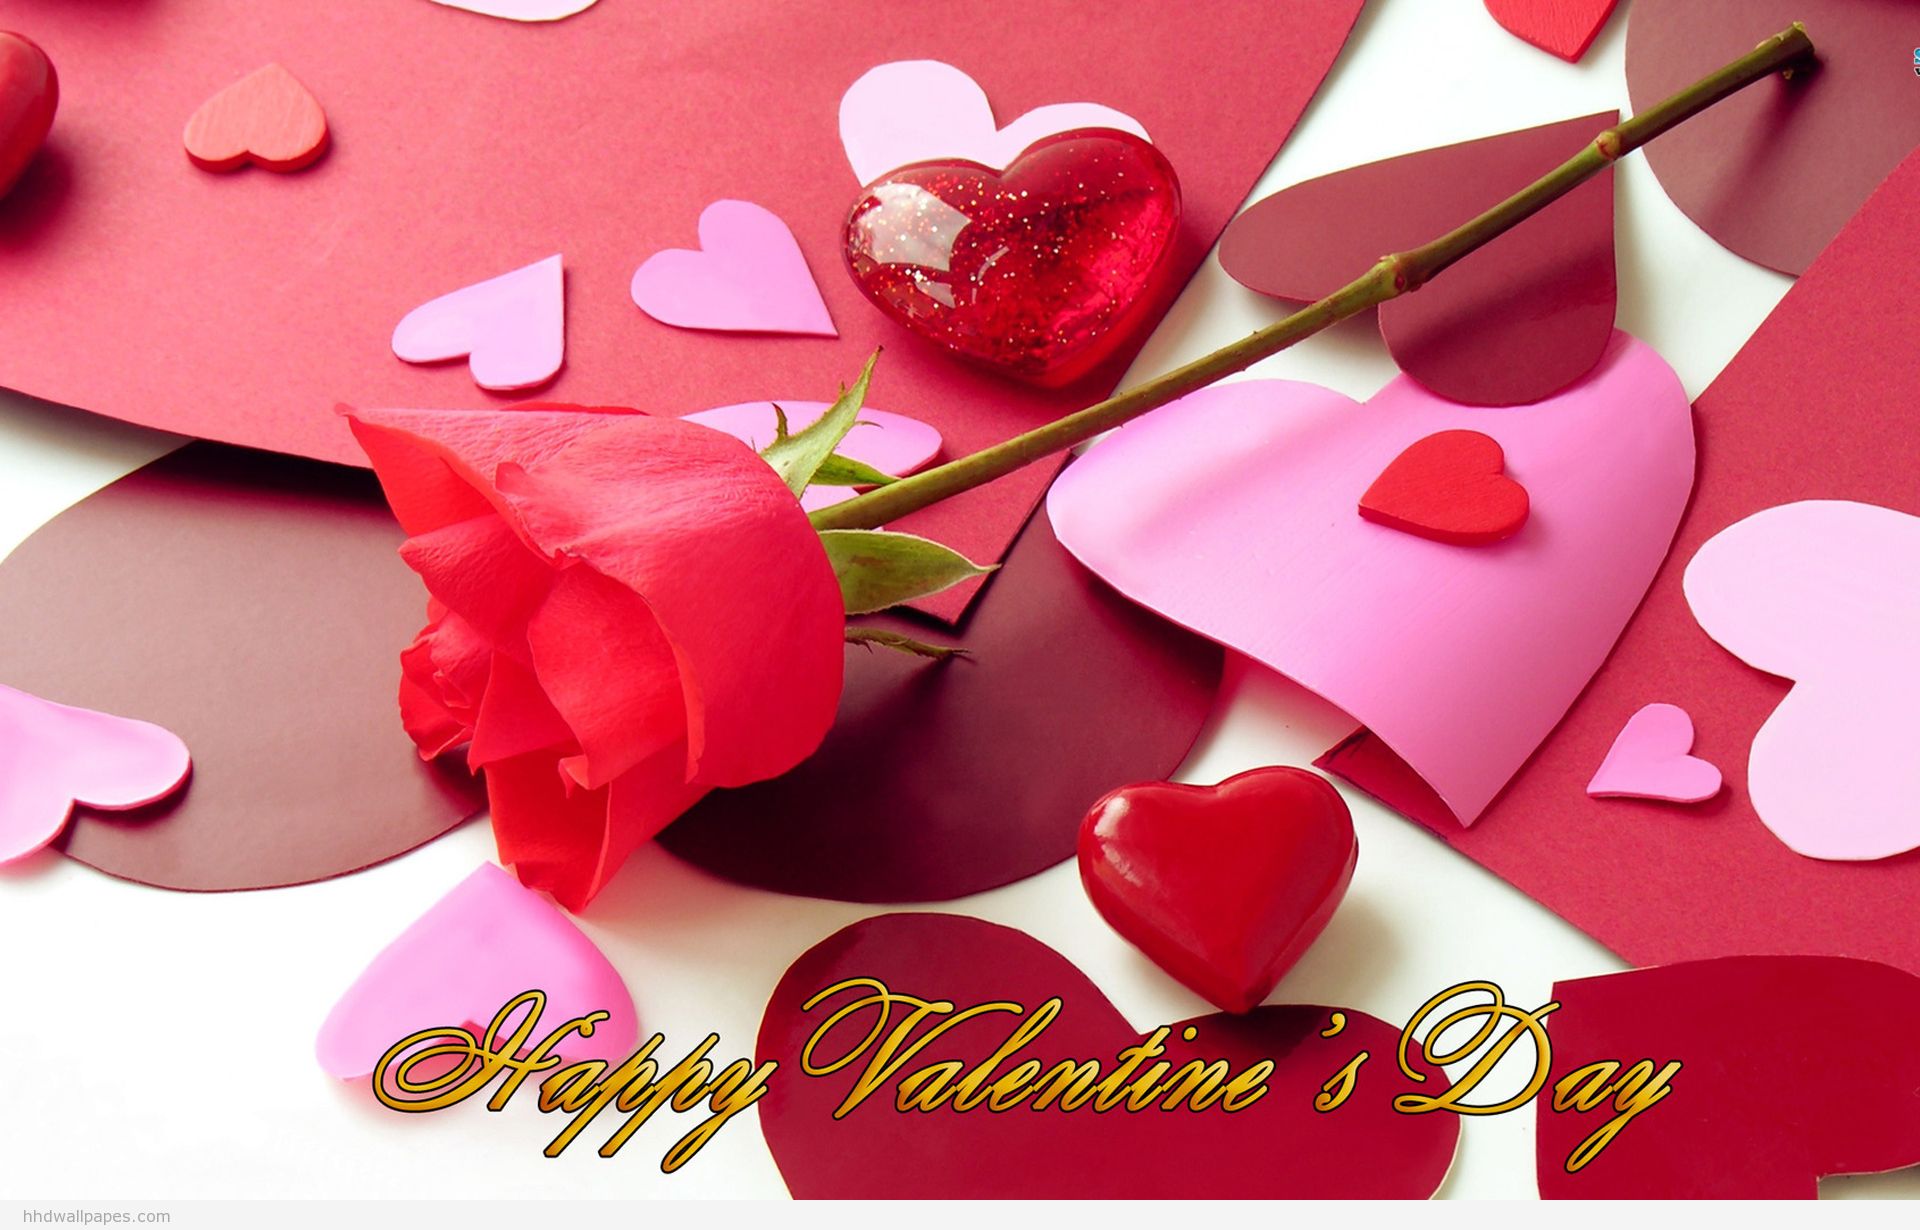 Happy-Valentines-Day-Images-free-download